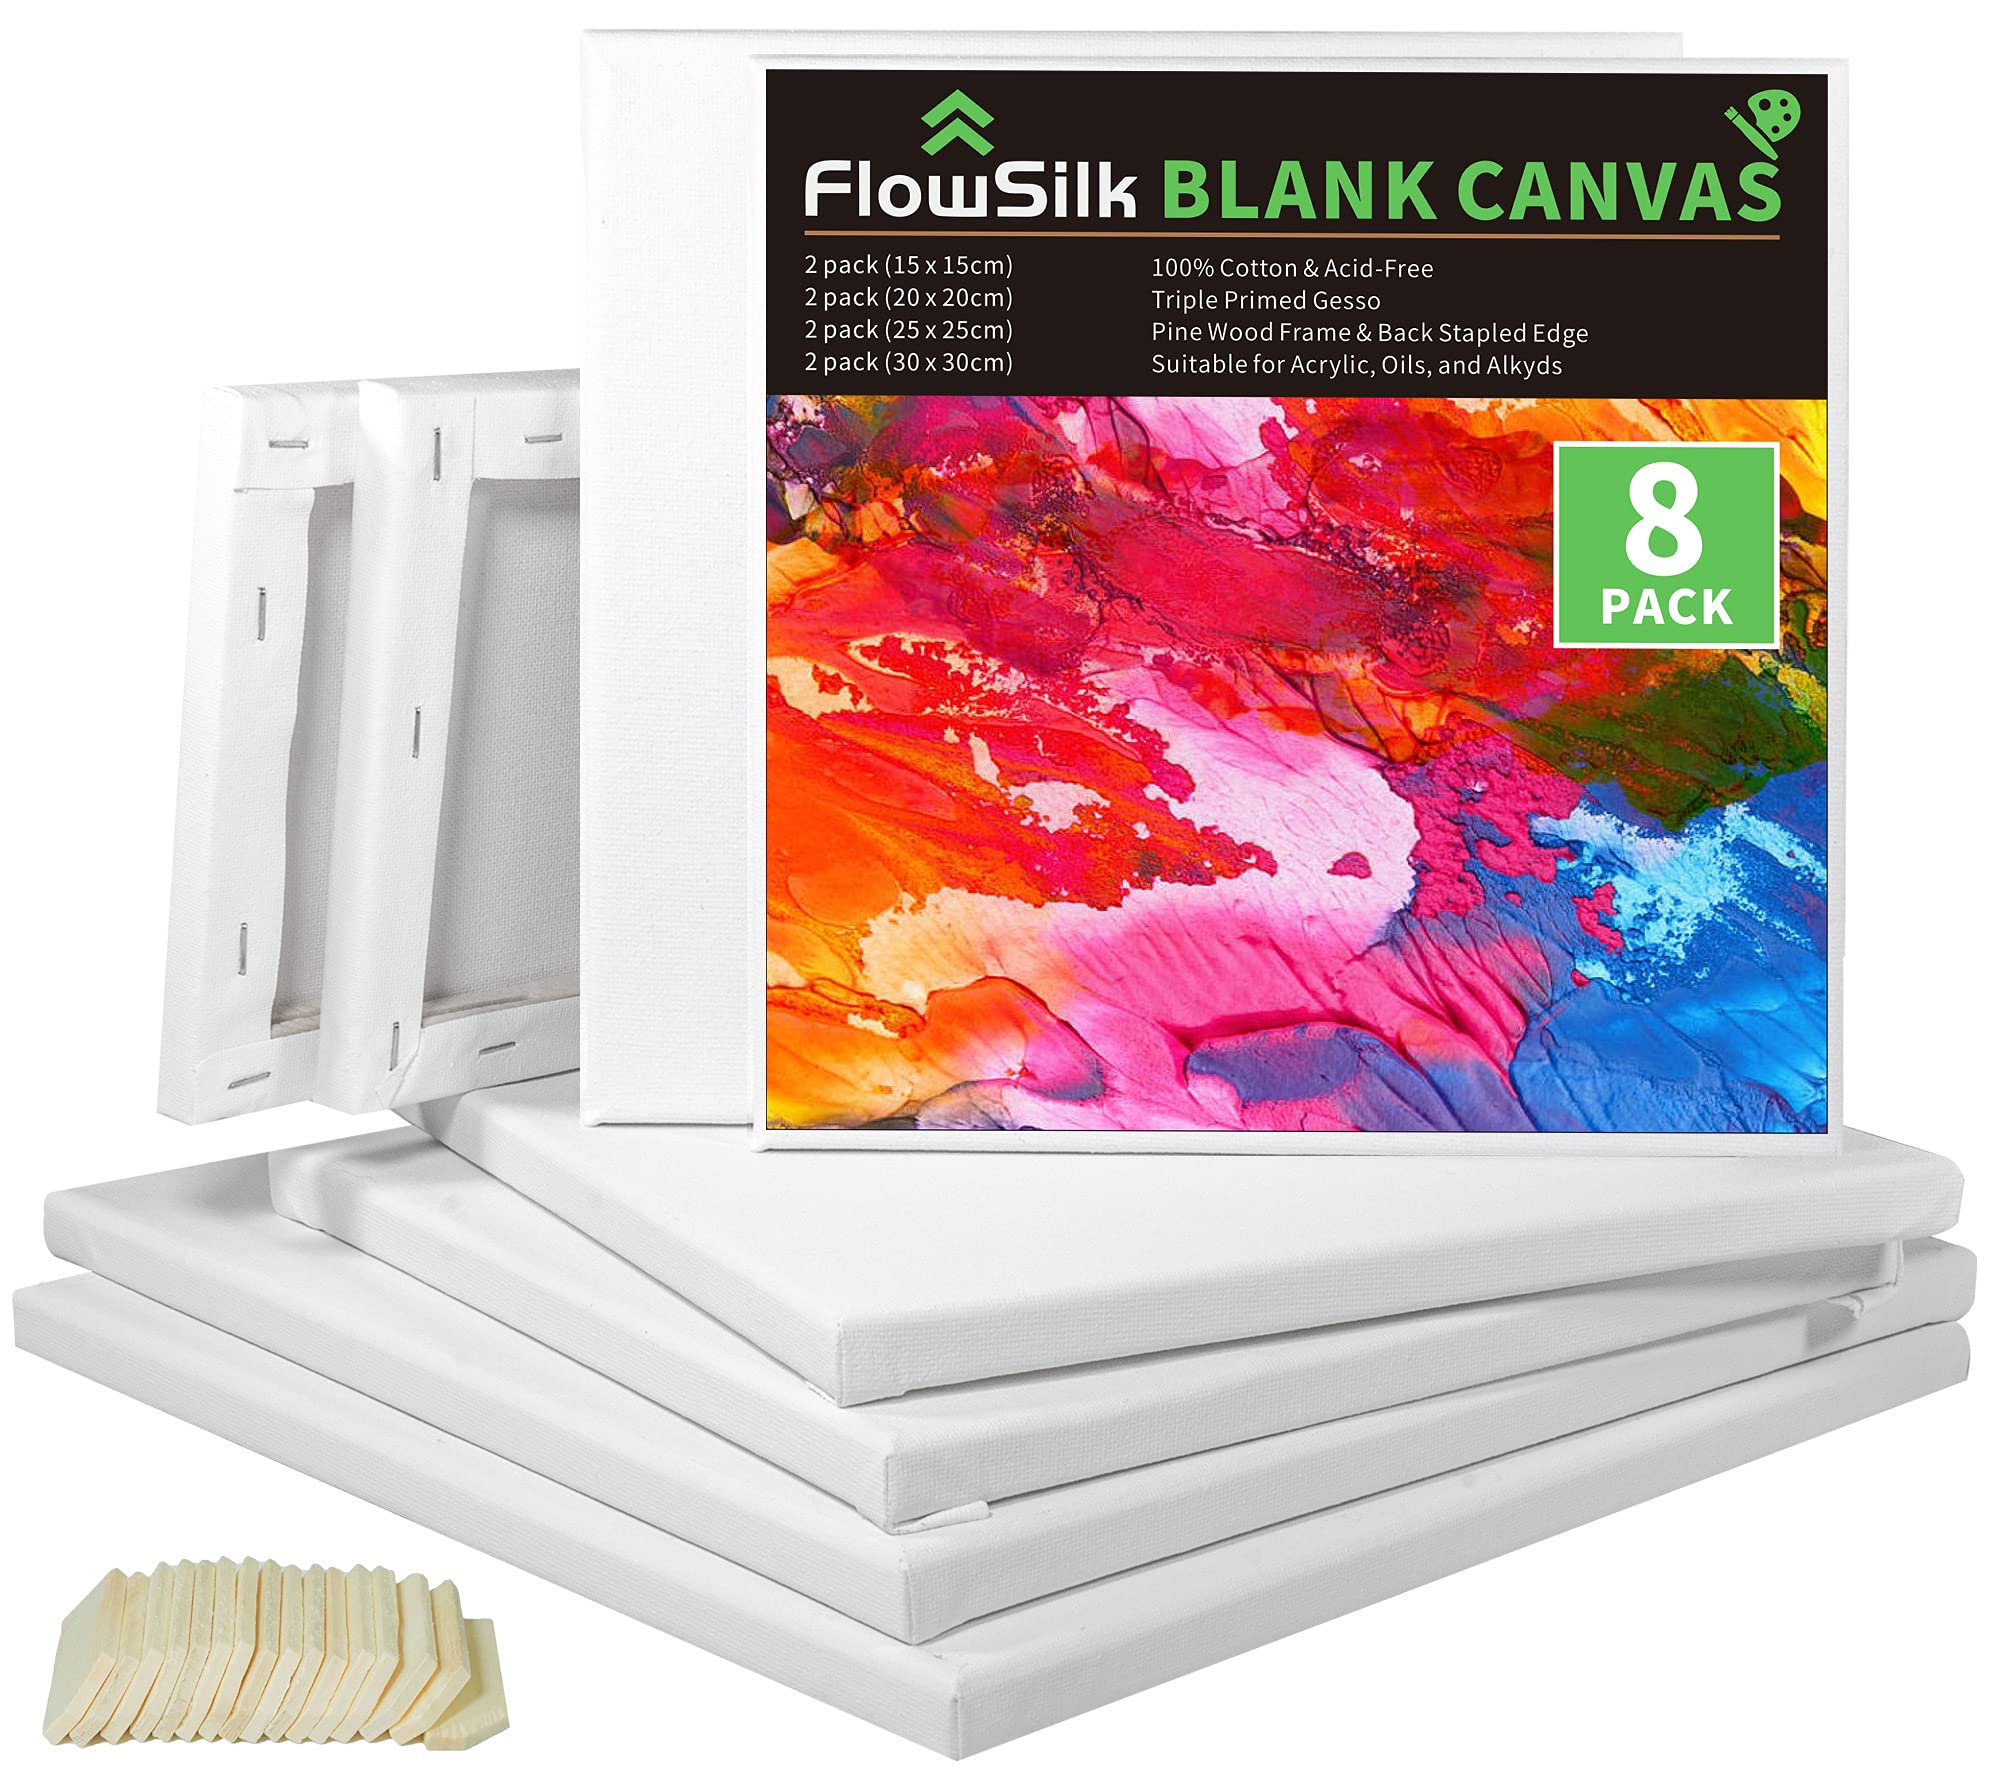 Blank Canvase Boards for Painting, 6x6", 8x8", 10x10" 12x12", 8 Pack 100% Cotton Stretcher Academy Acrylic Oil Painting, Canvases for Kids & Artist